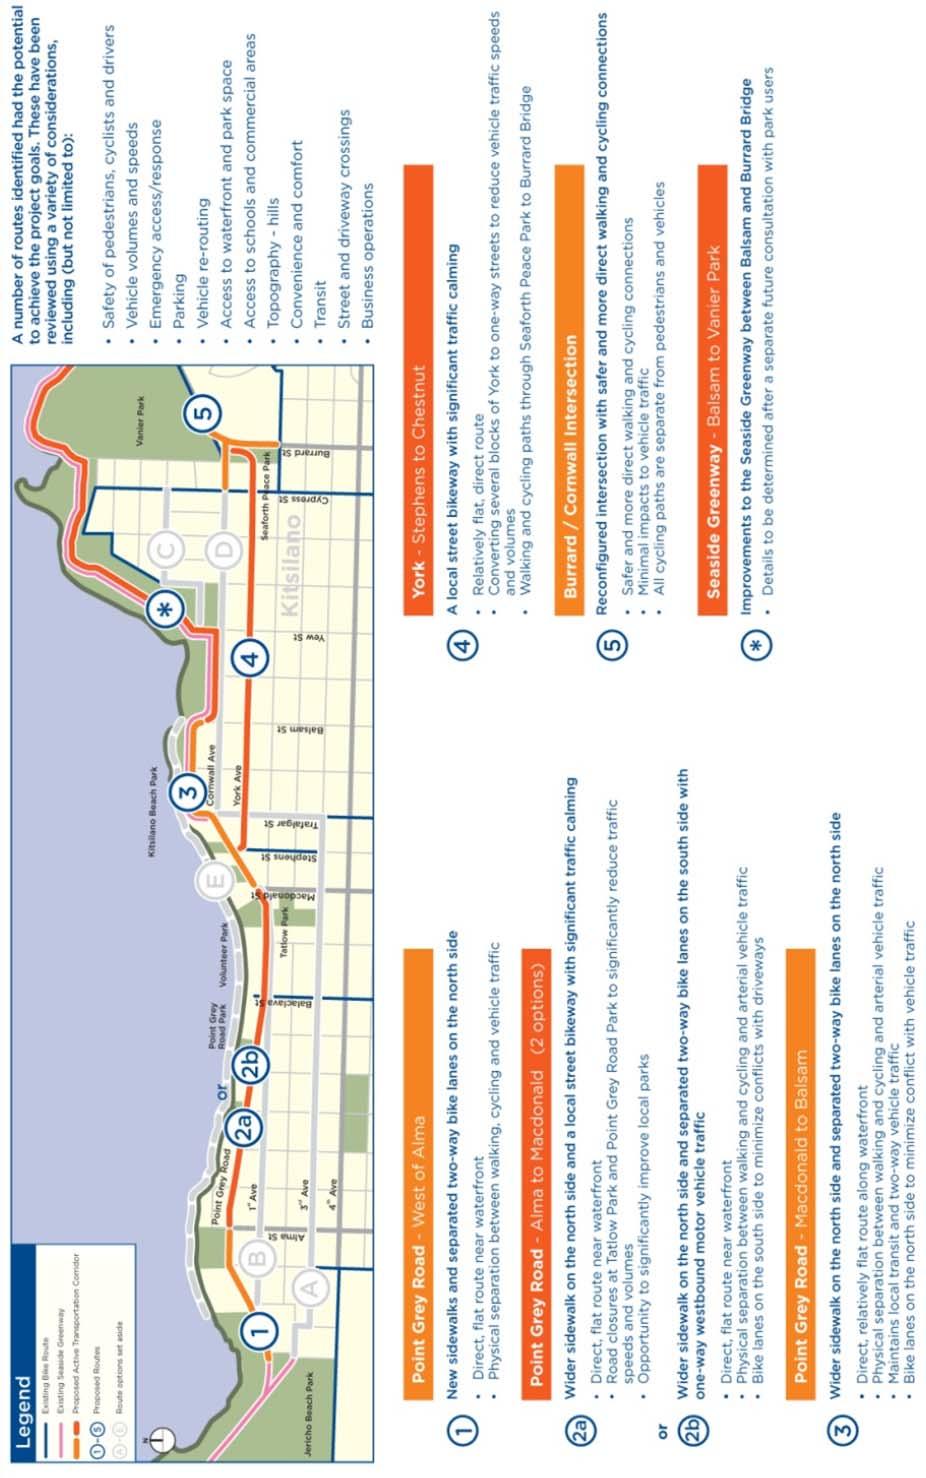 Active Transportation Corridor: Seaside Greenway Completion and York Bikeway (Phase 1 of